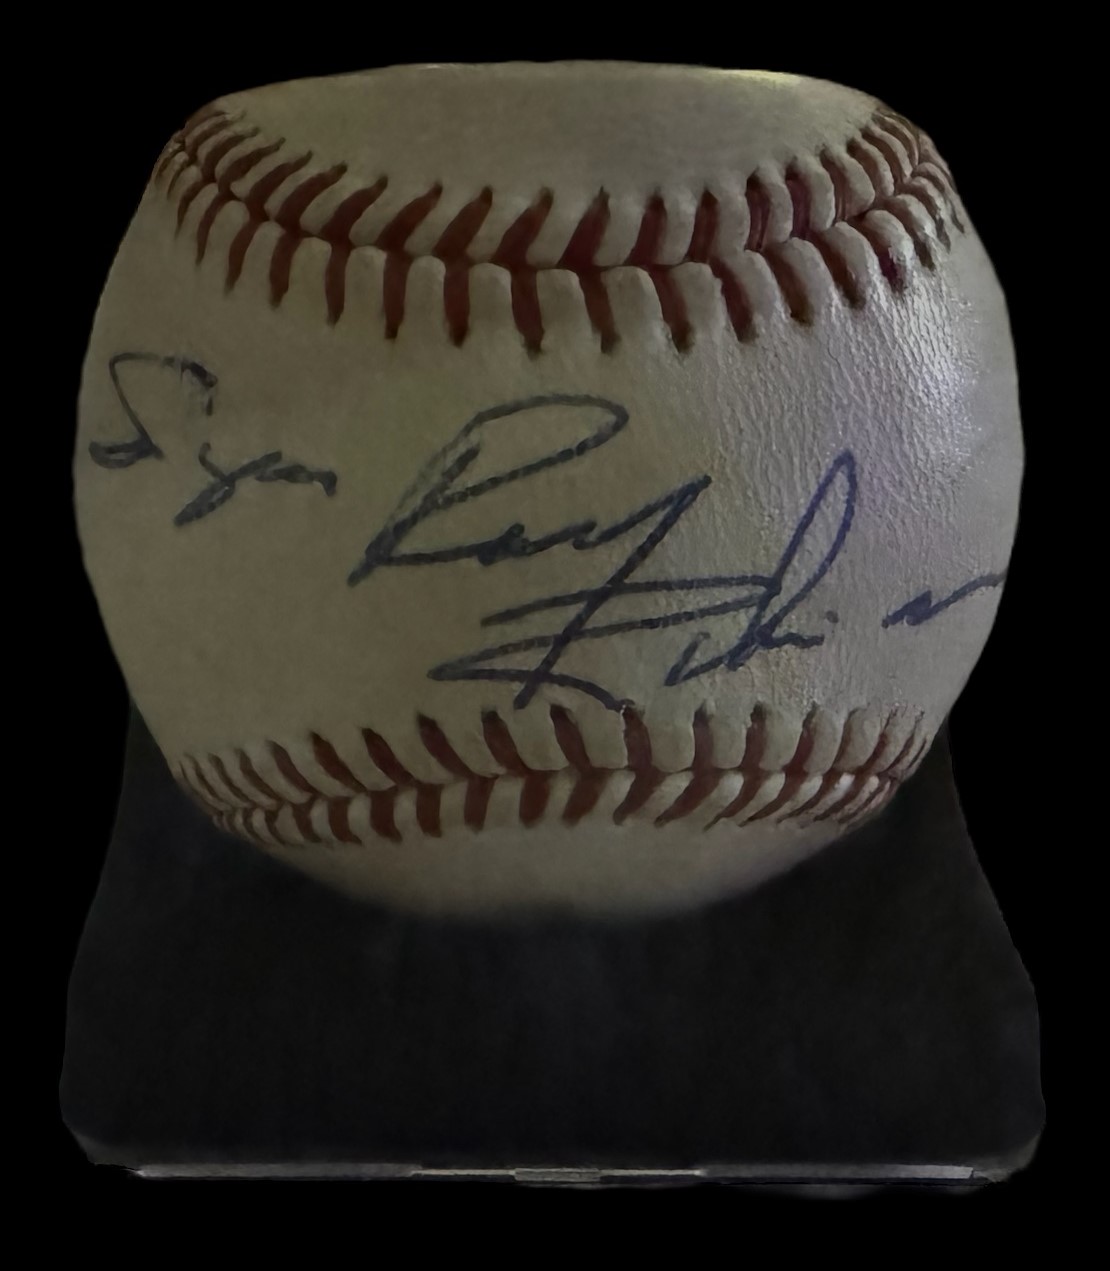 Sugar Ray Robinson signed baseball in display case. American professional boxer who competed from